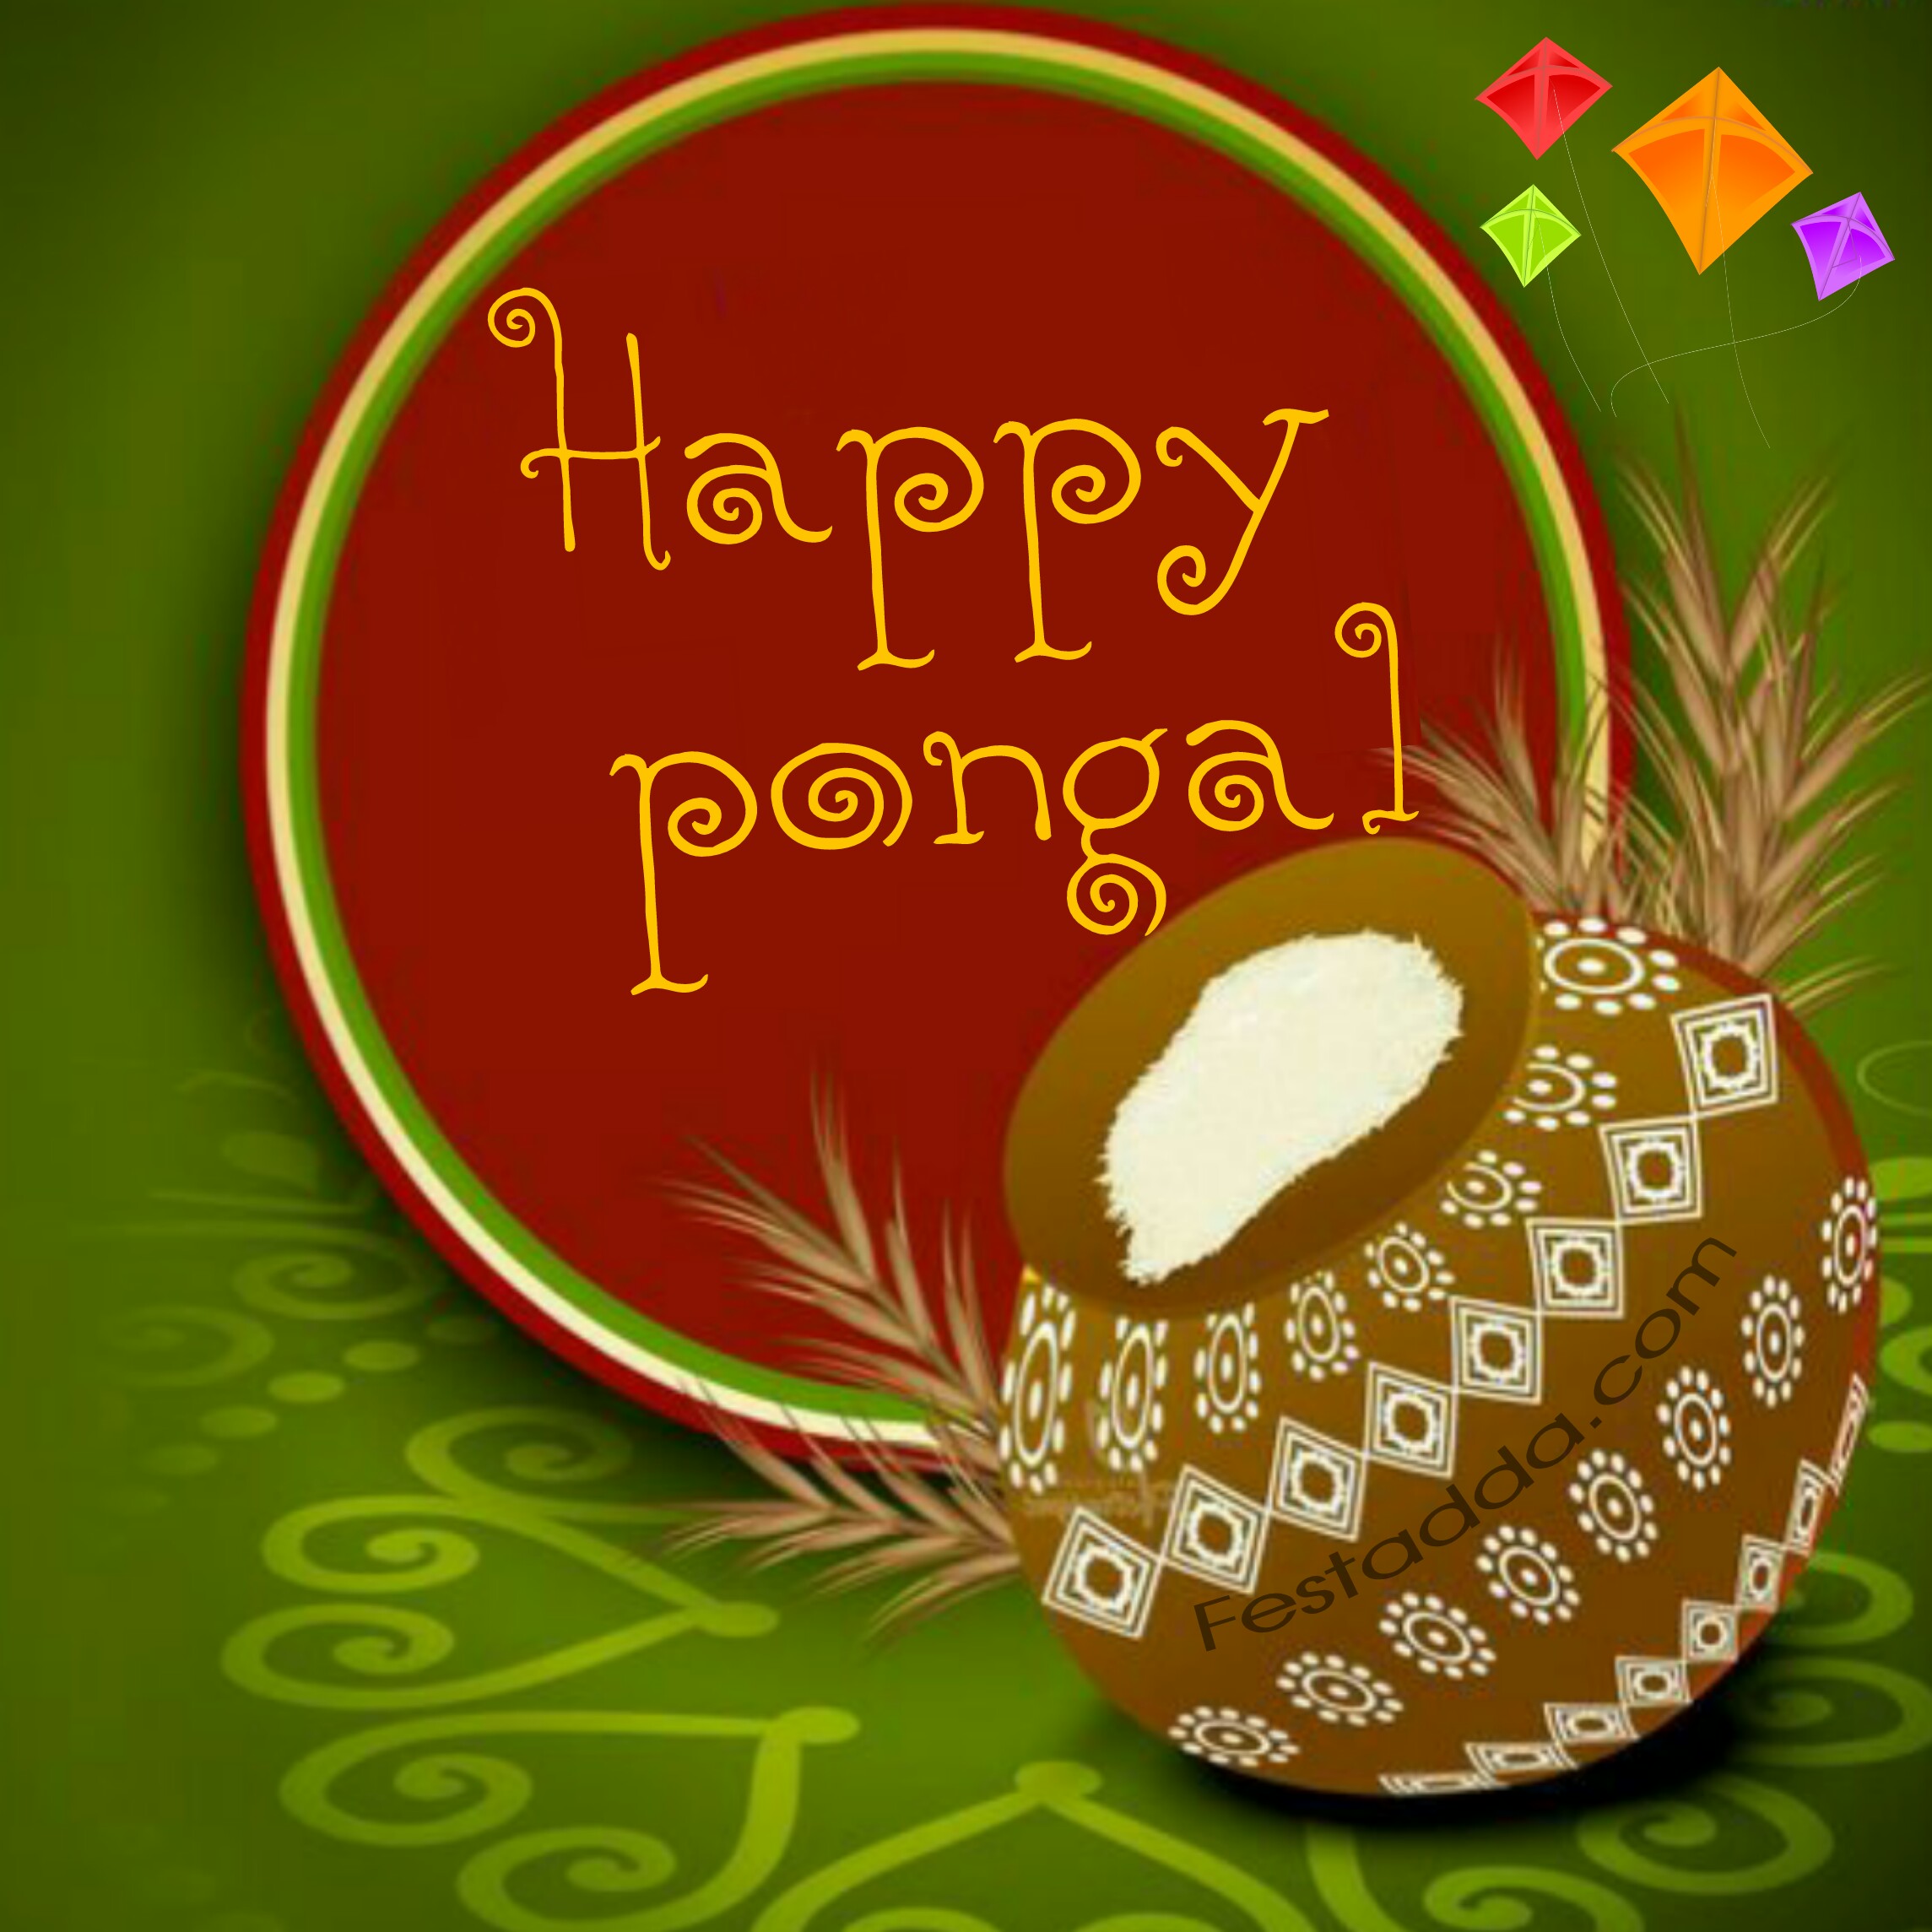 Tamil Pongal Images Free Download - Happy Pongal Images 2019 , HD Wallpaper & Backgrounds